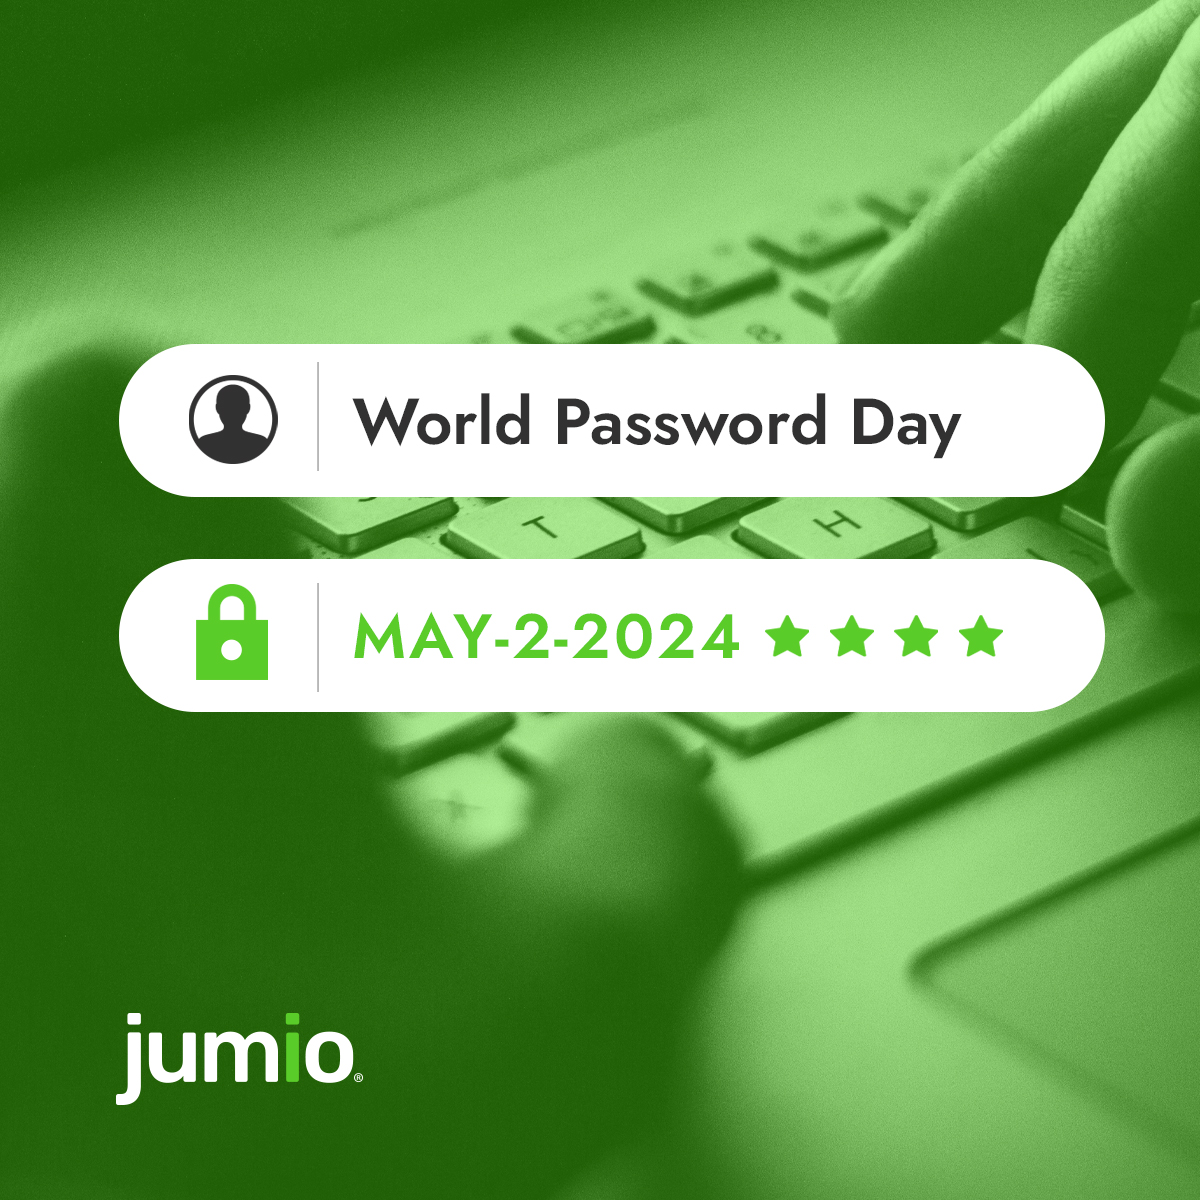 “In an age of AI-assisted cyberattacks, #WorldPasswordDay needs to become World Passwordless Day,” says Jumio CTO Stuart Wells. “The password has outlived its usefulness, and we need stronger ways of protecting ourselves online.” More via @inquirerdotnet: opinion.inquirer.net/173198/insight…